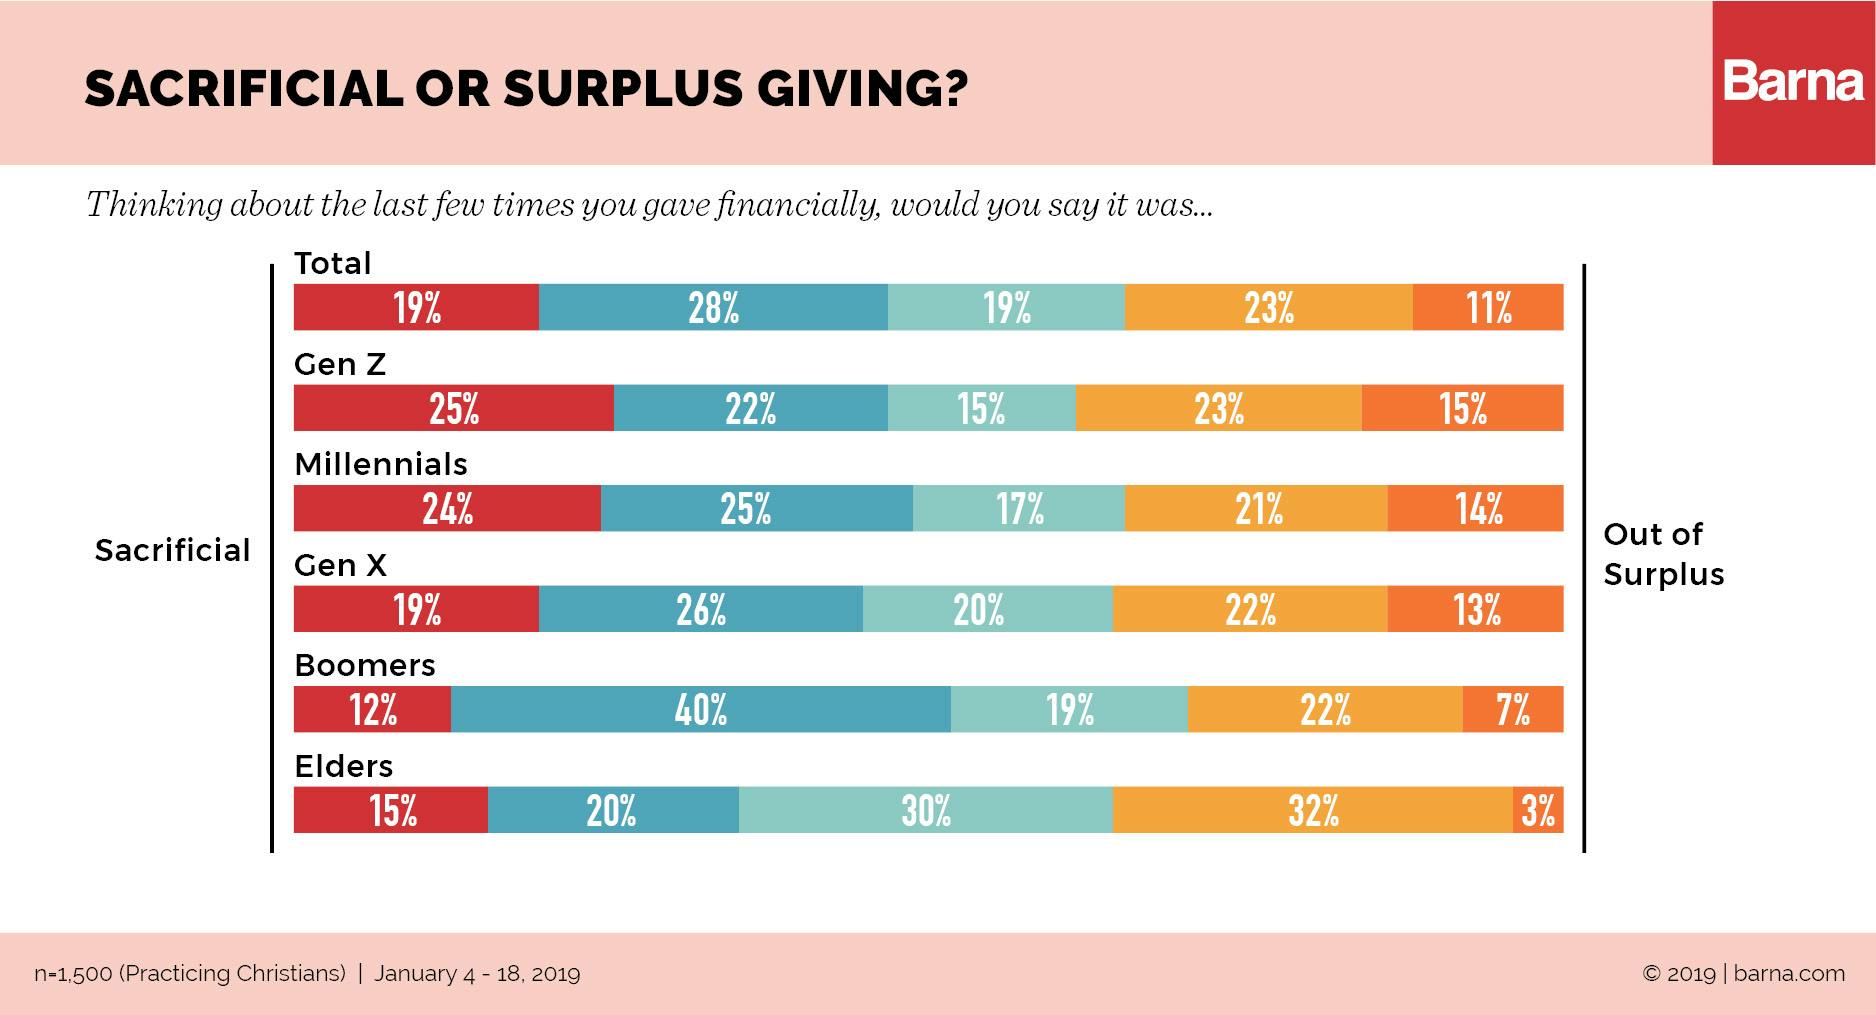 How Different Generations Approach Generosity